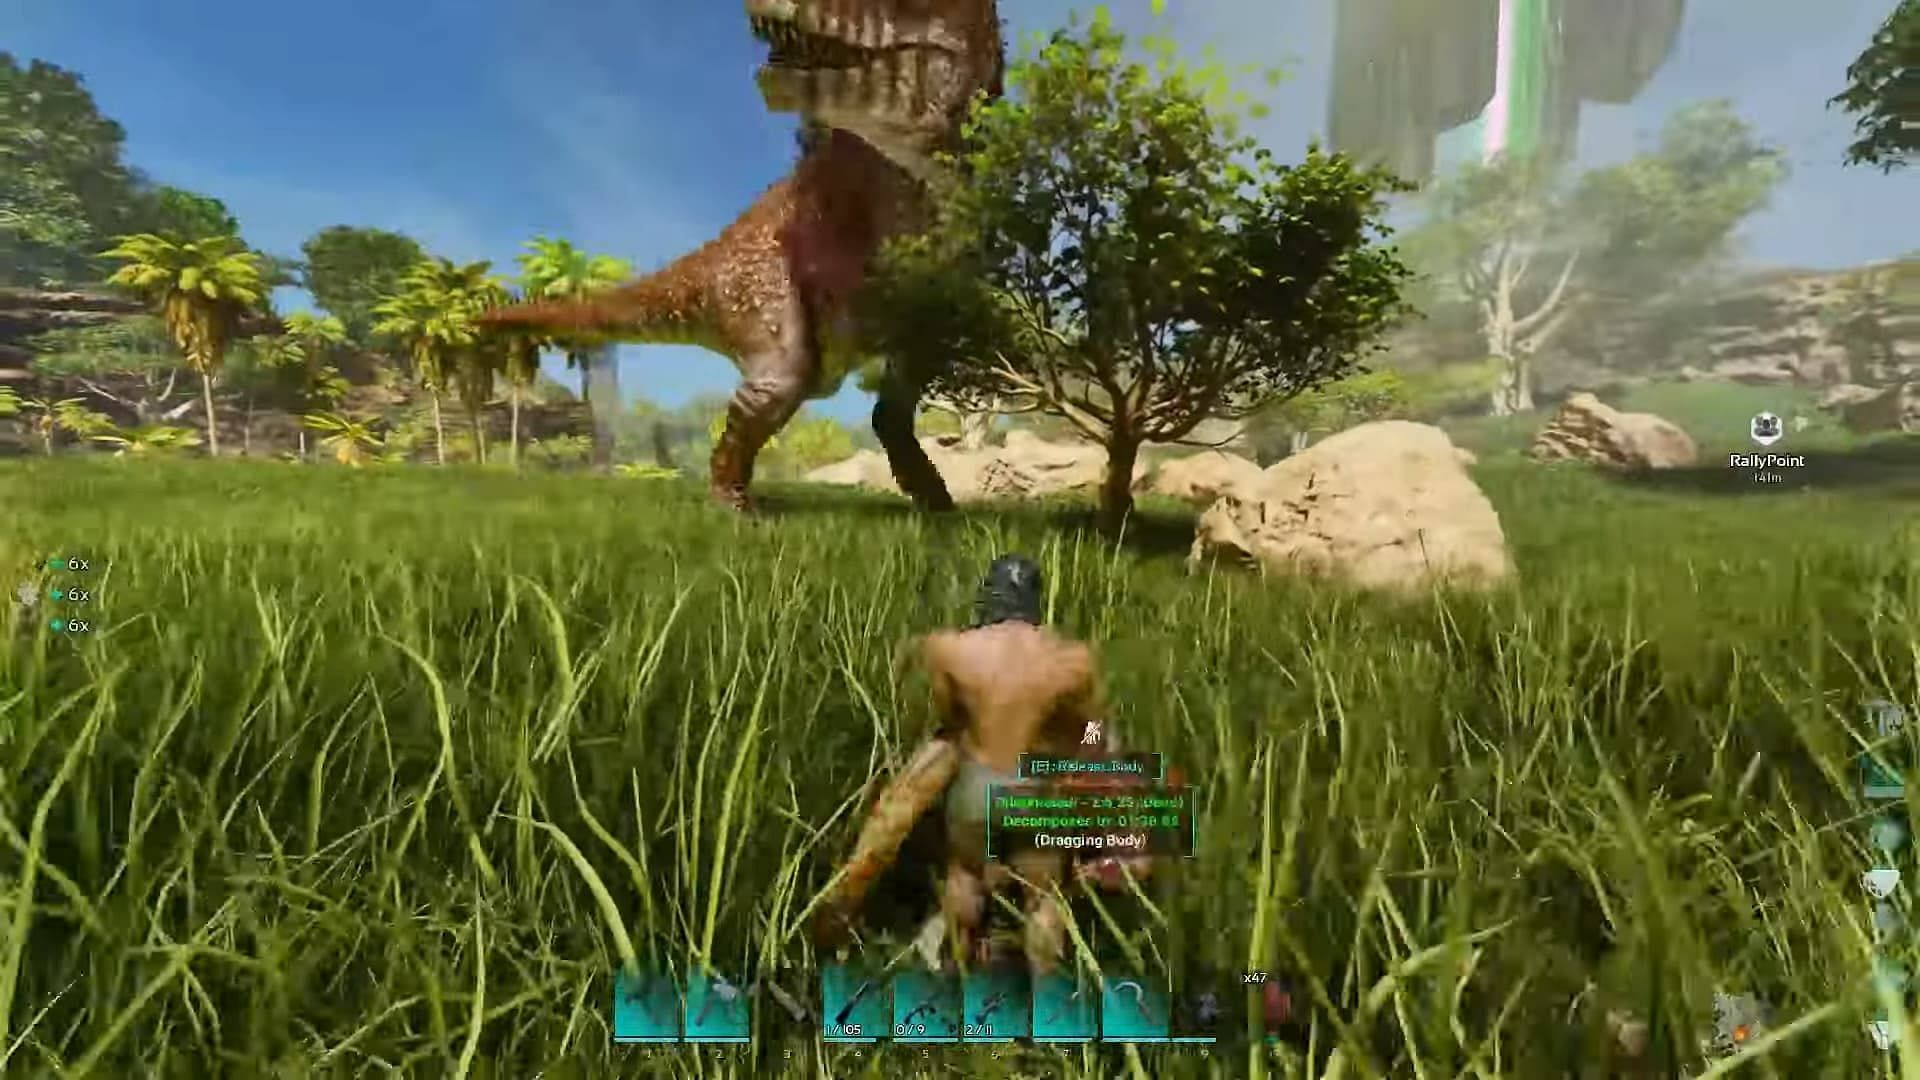 Taming a Carcharodontosaurus in ARK Survival Ascended (Image via Studio Wildcard)